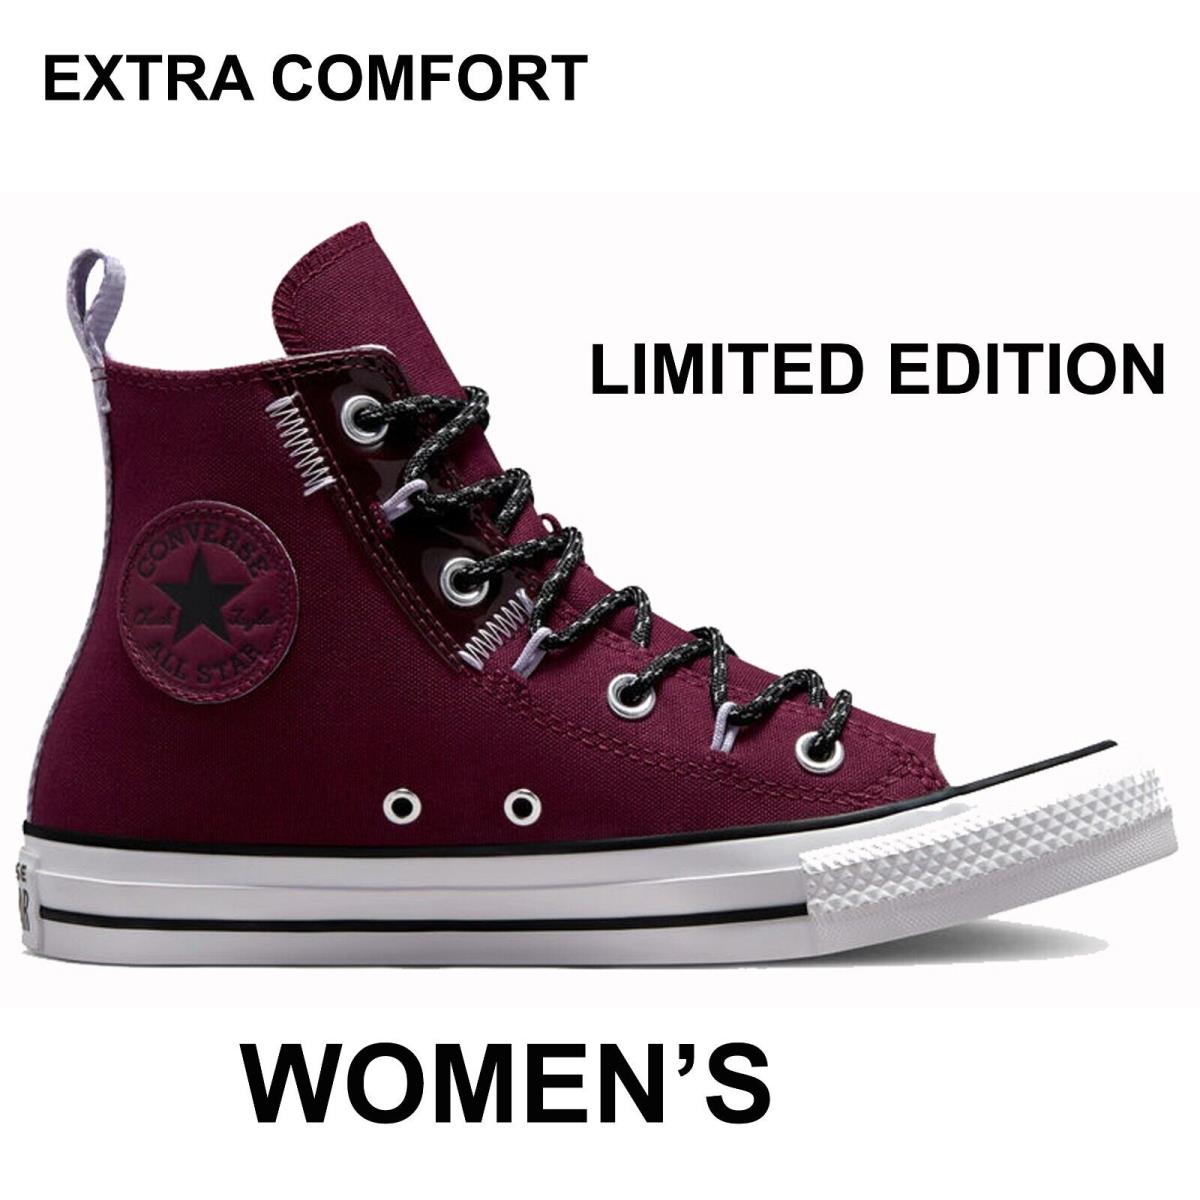 Converse Women`s Chuck Taylor All Star Craft Ctas Shoes Limited Edition - Red